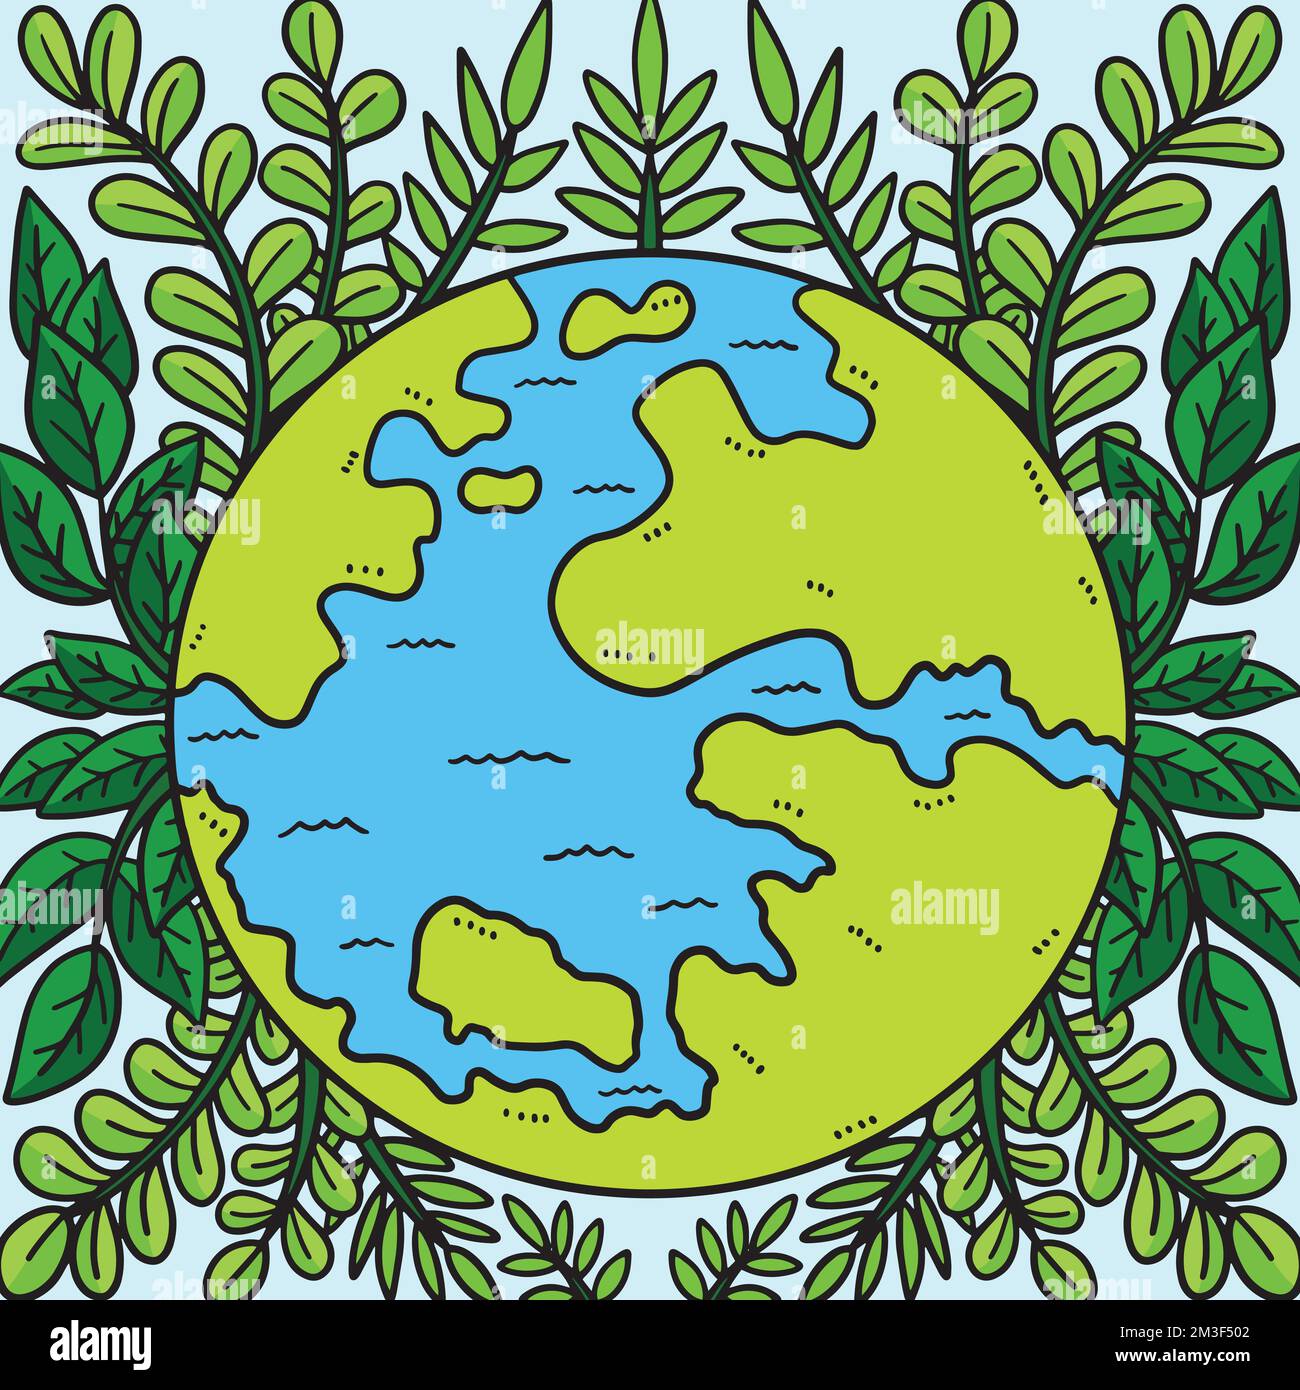 Earth Day Earth Surrounded by Leaves Colored  Stock Vector